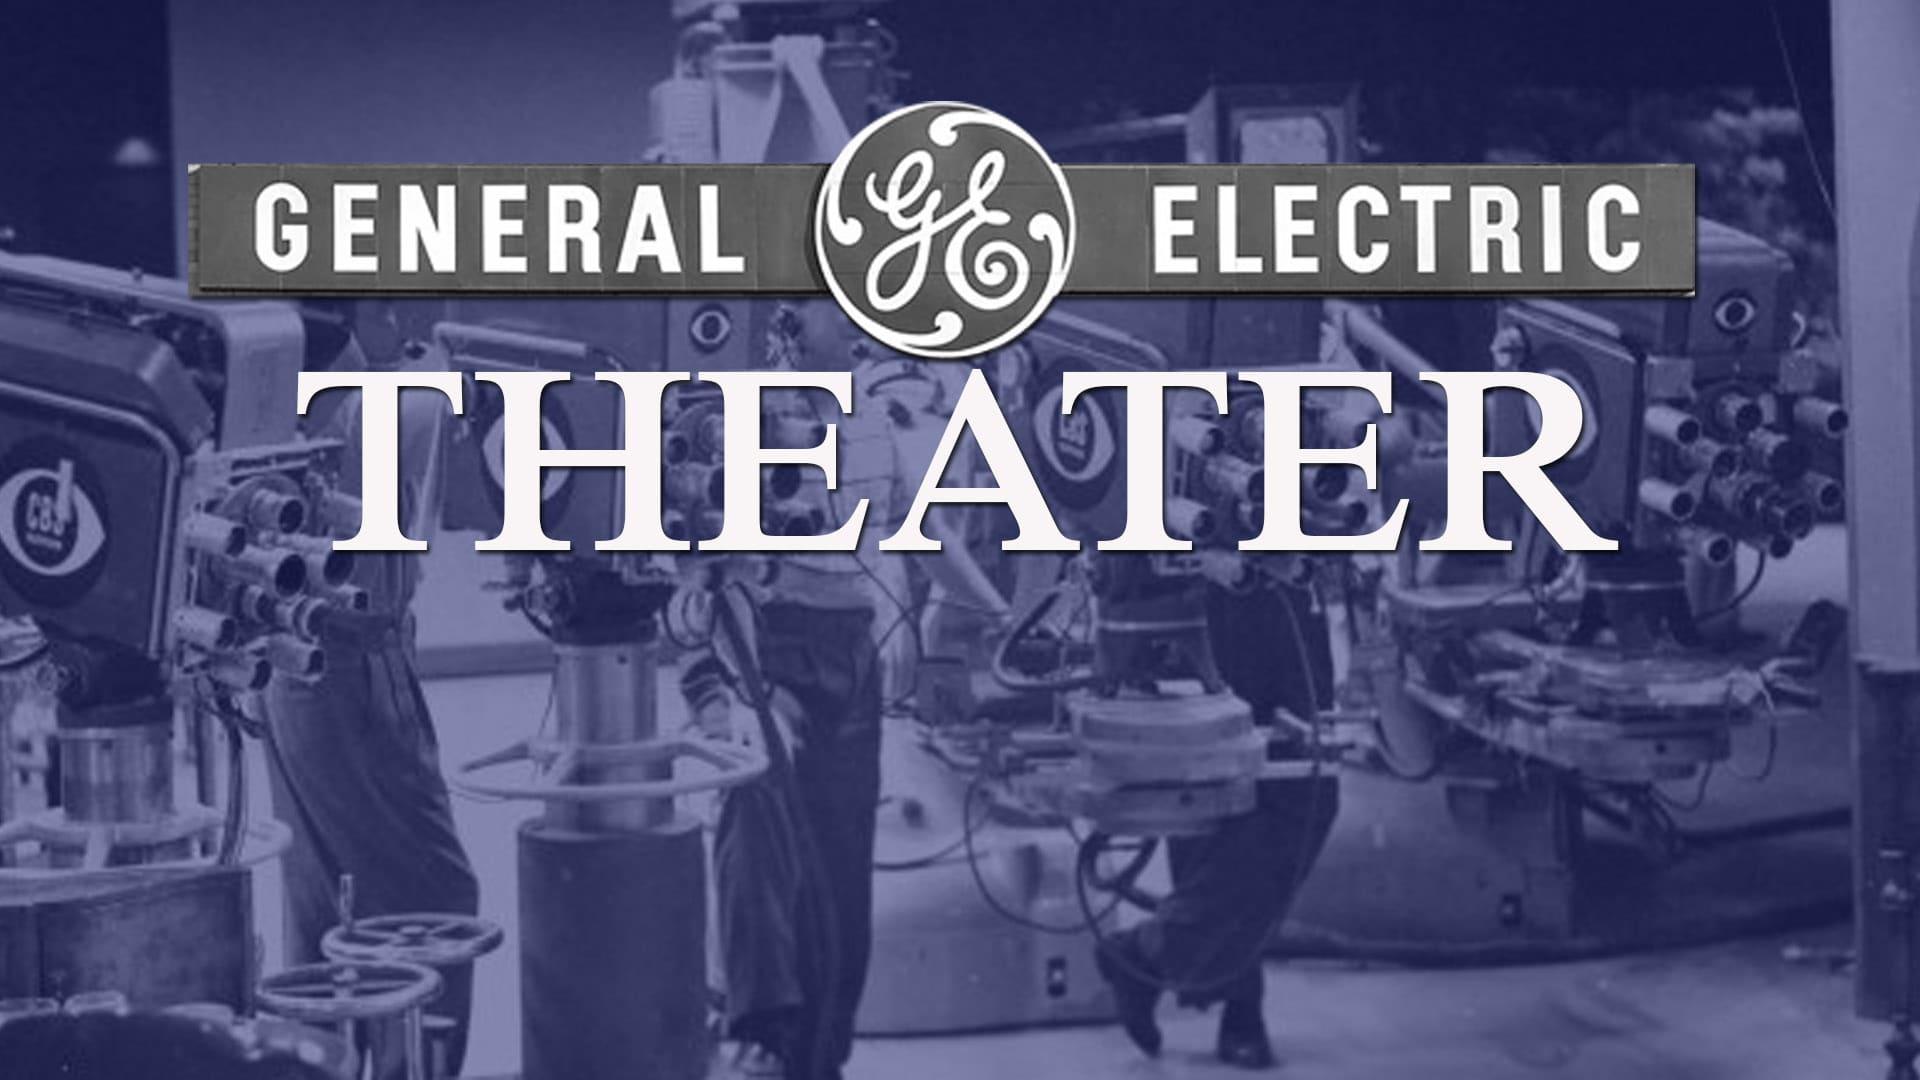 General Electric Theater backdrop